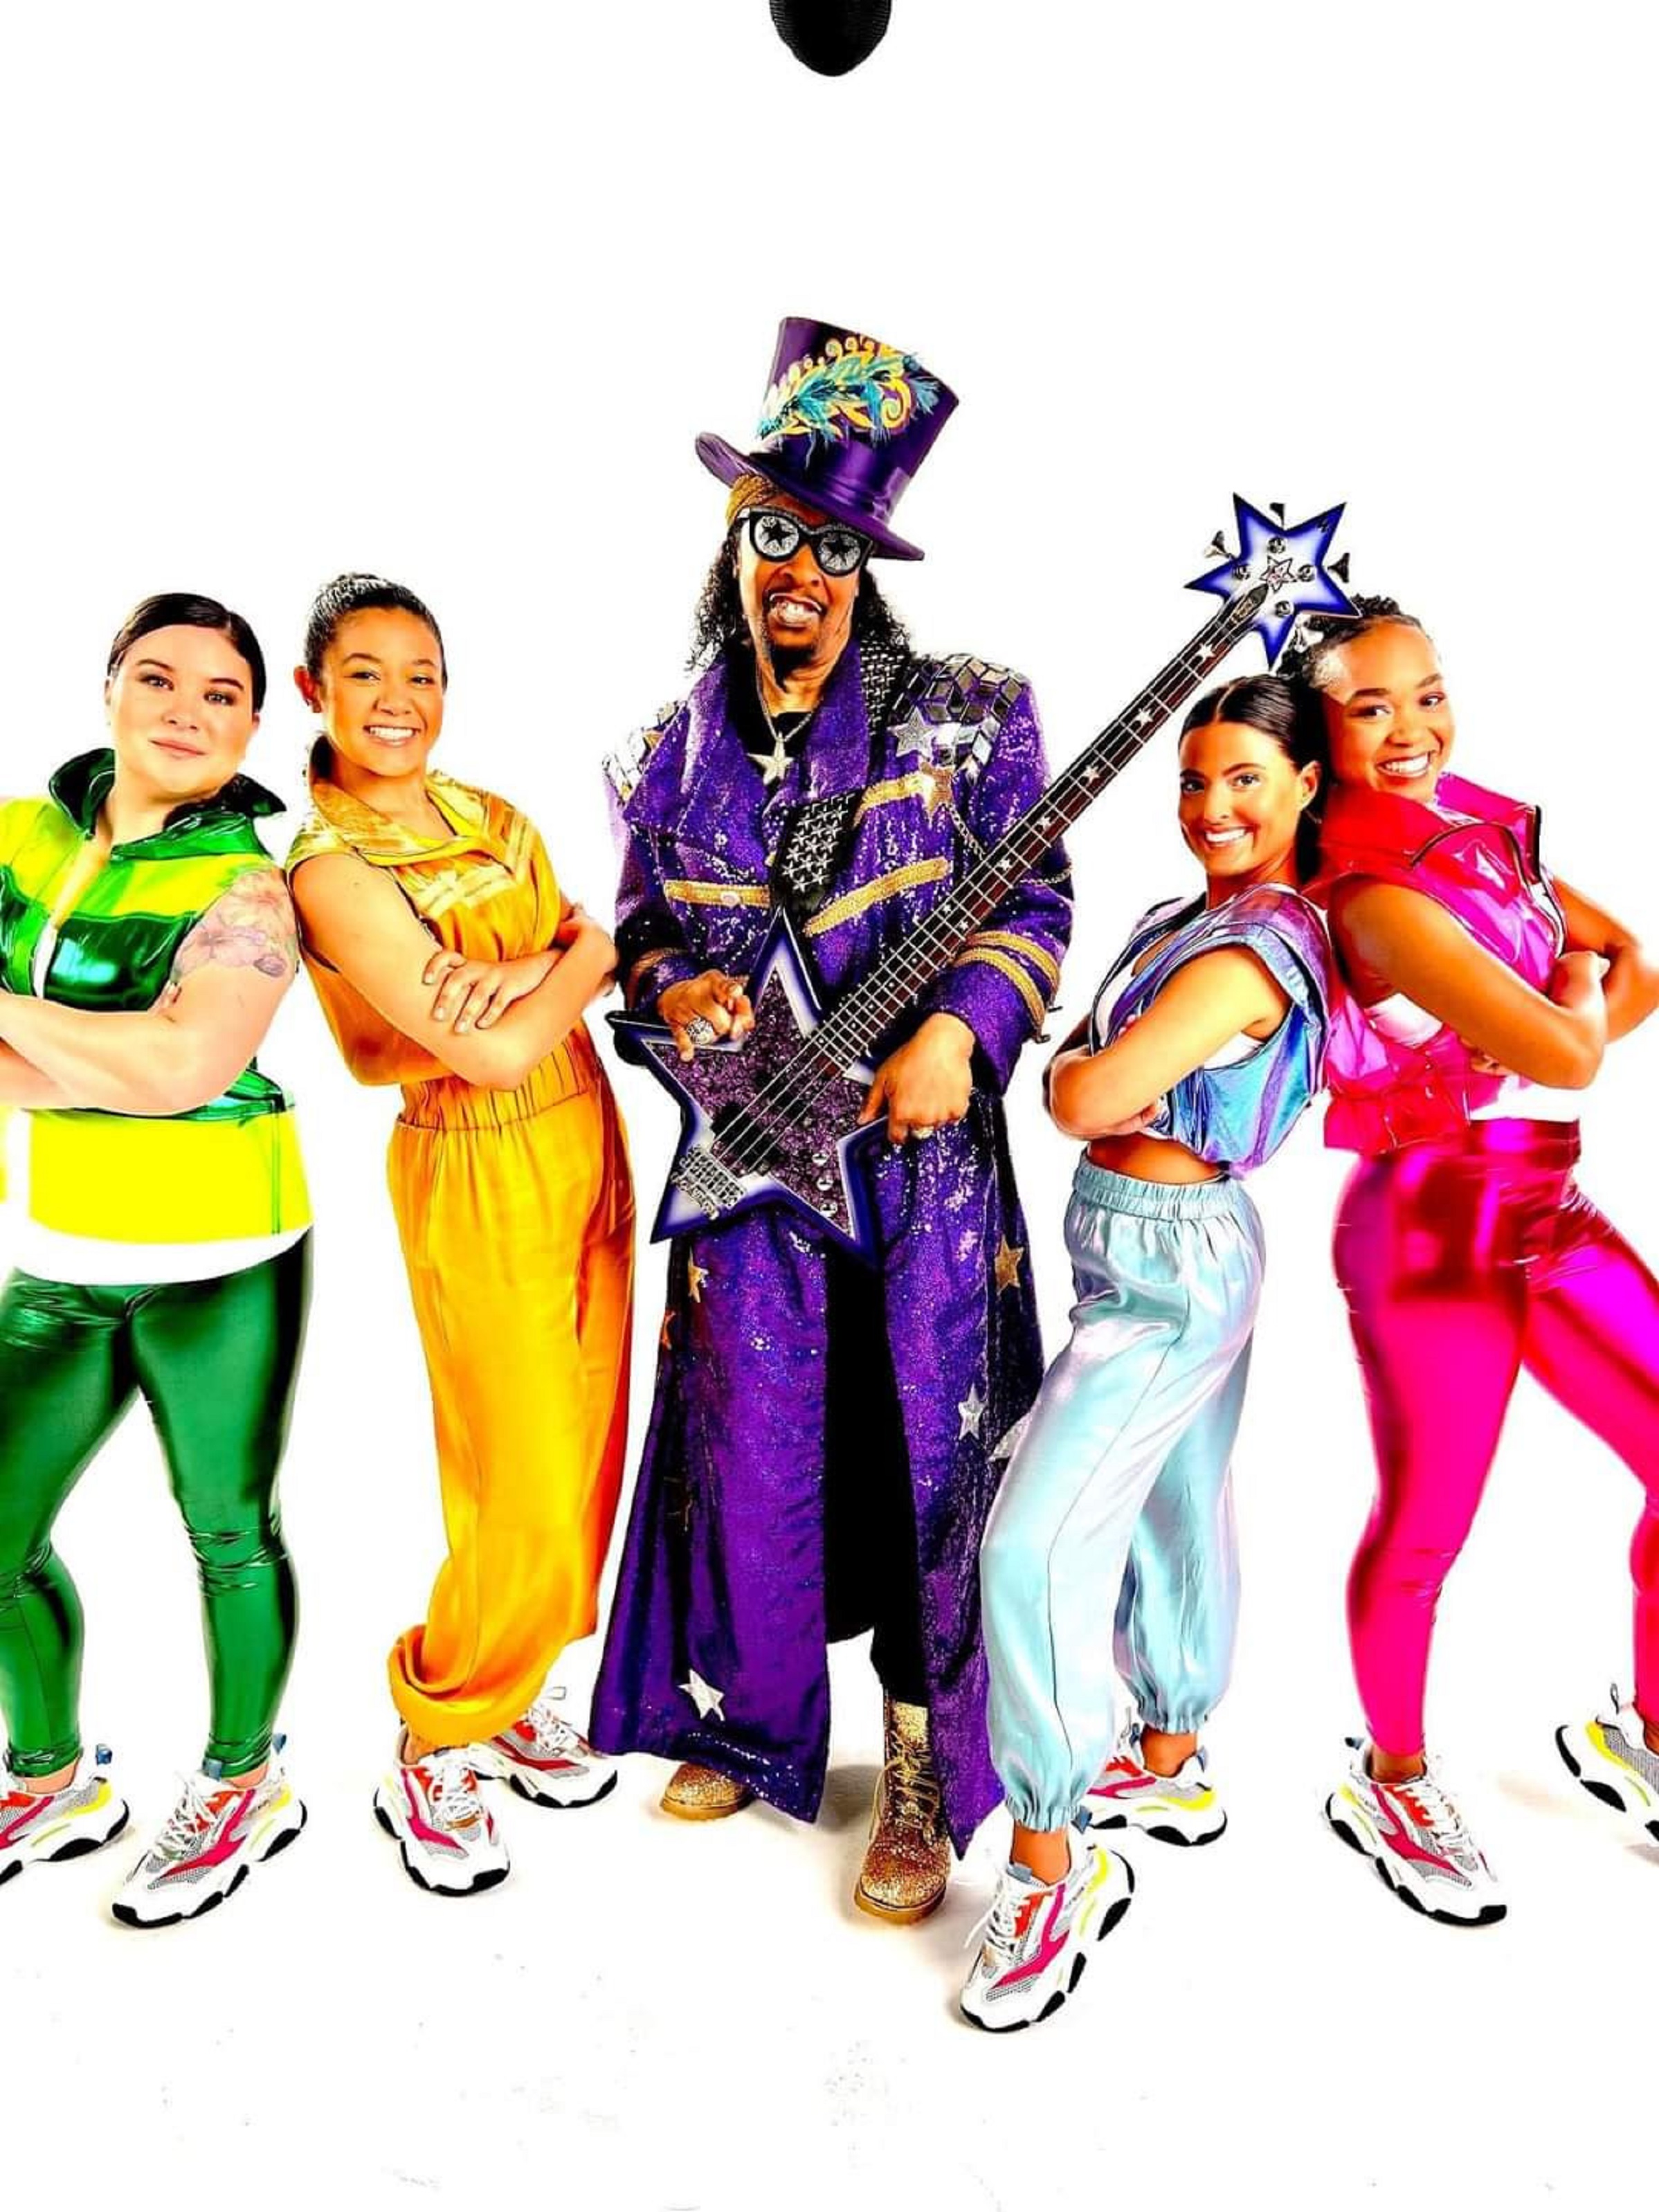 Bootsy Collins brings his epic energy & funk to the World Games opening & closing ceremonies